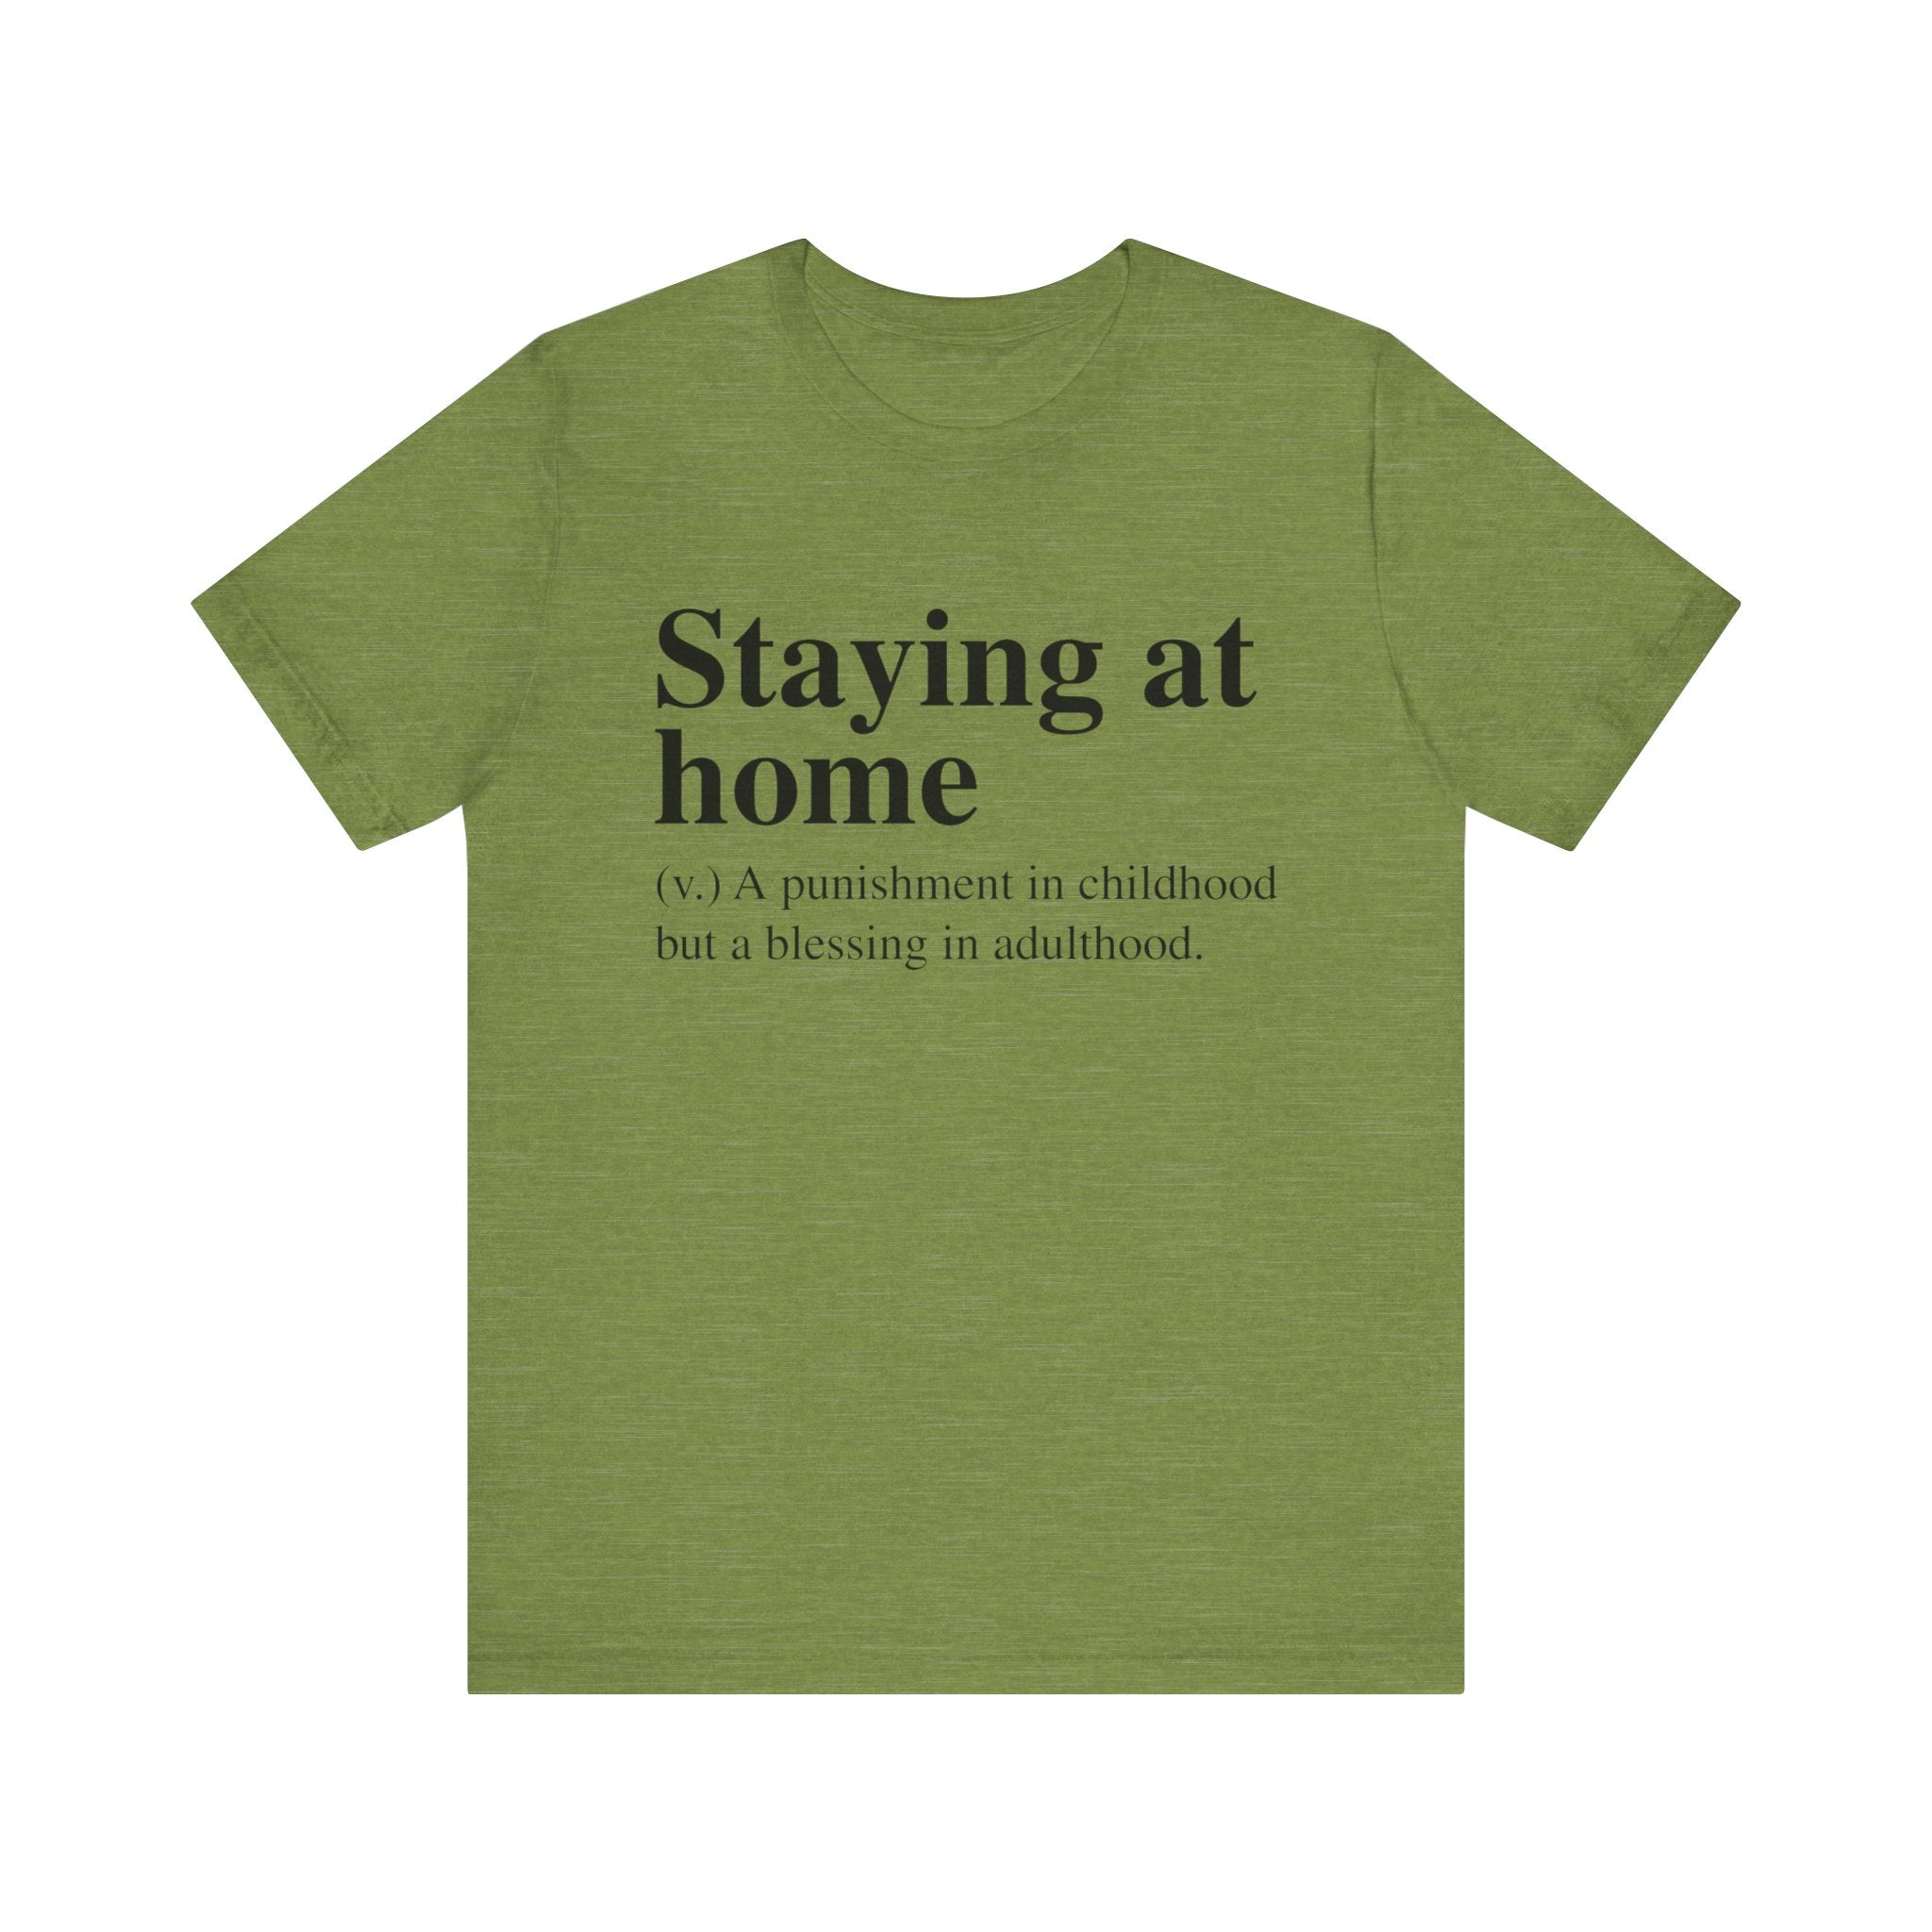 Olive green Staying at Home unisex jersey tee with the phrase "staying at home (v.) a punishment in childhood but a blessing in adulthood" printed in white on the front, offering a comfortable fit.